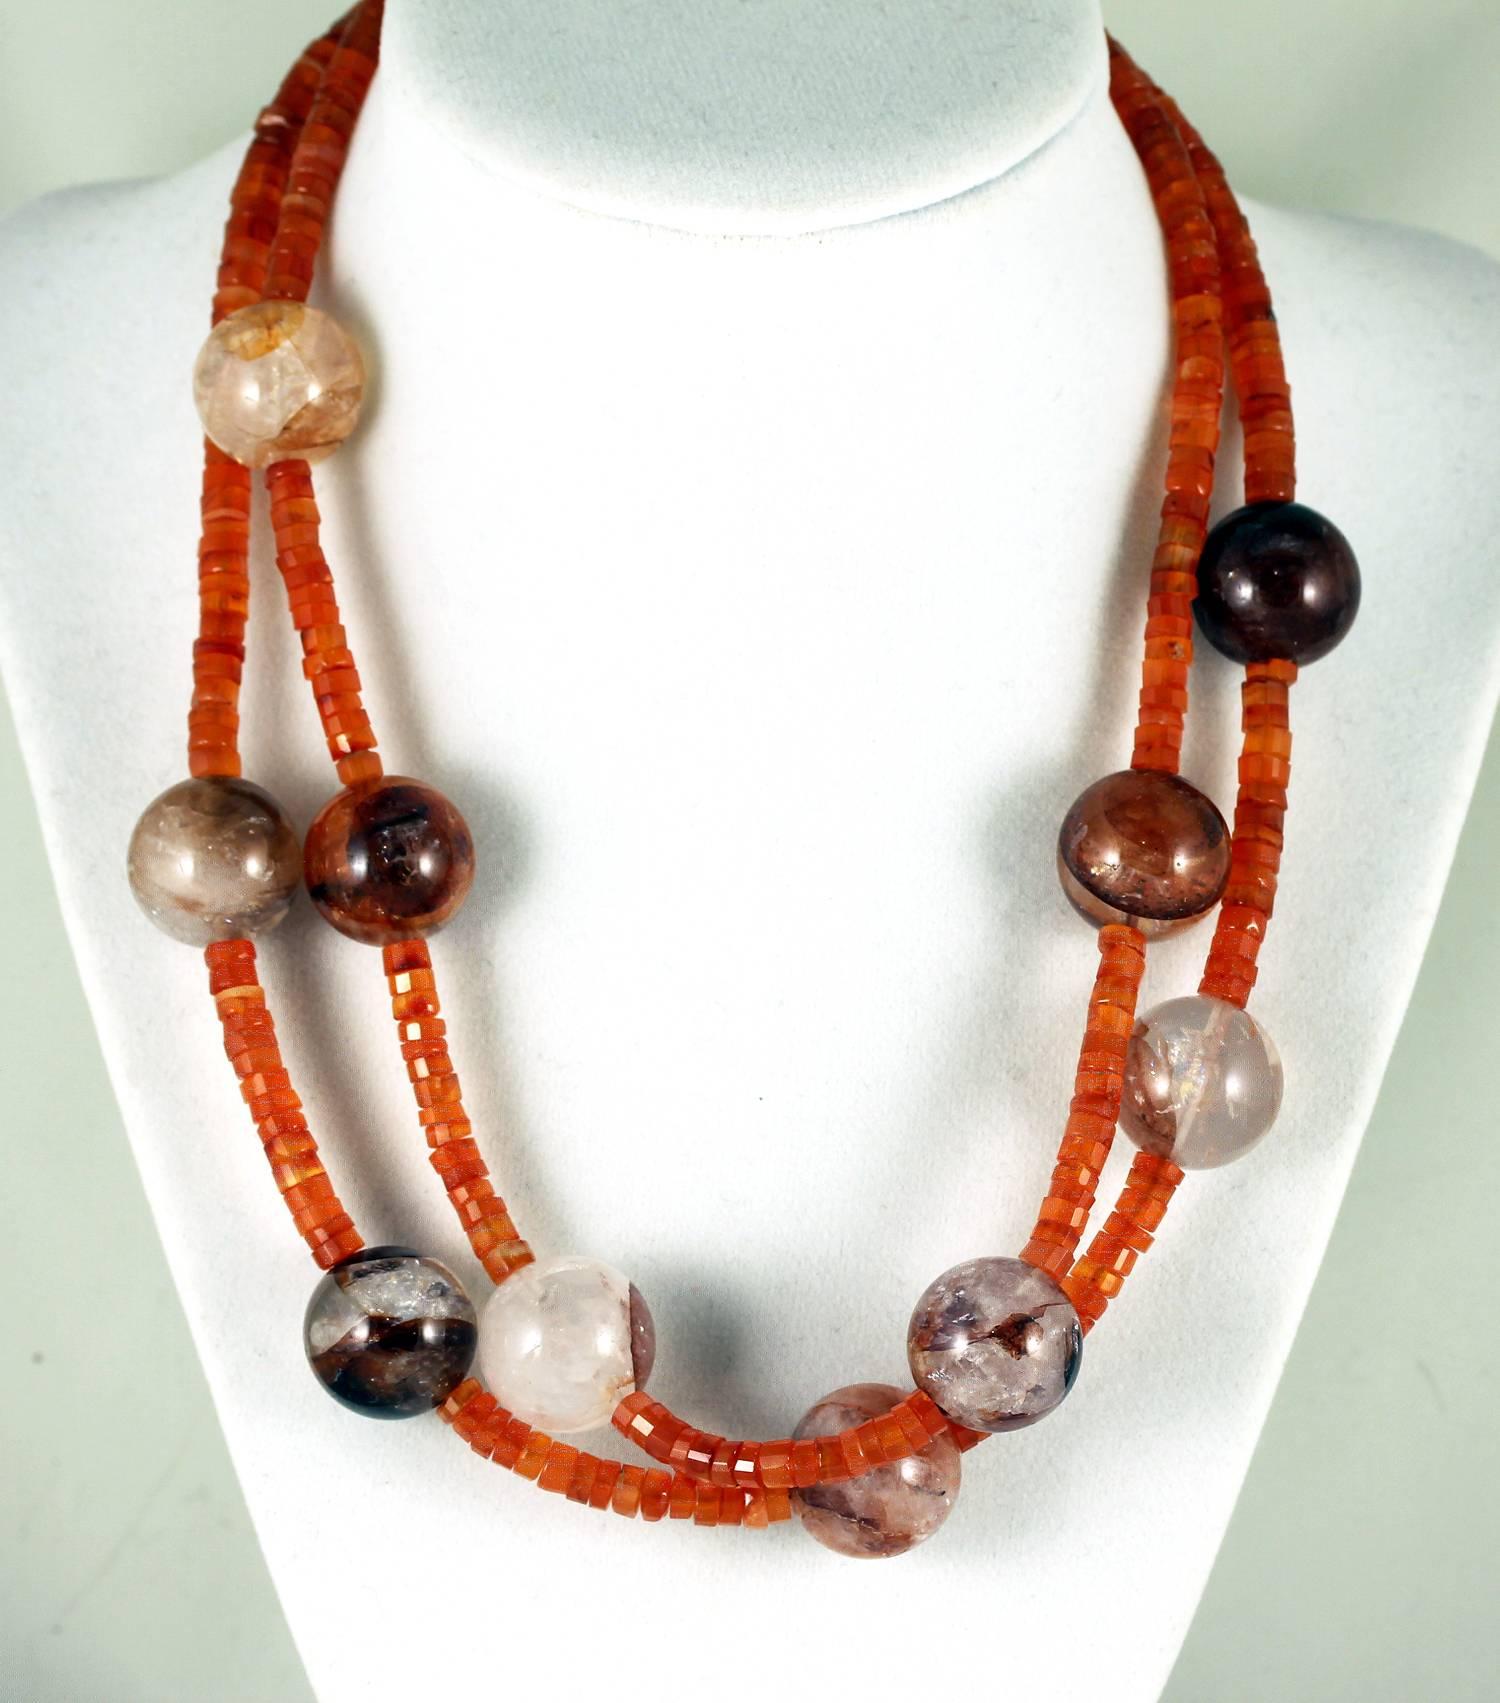 If you like Orange this double strand of gemcut highly polished Carnelian is enhanced with large translucent glowing bright Strawberry Quartz glowing beautifully around your neck evening or daytime.
Size:  Quartz approximately 18 mm
Length:  18